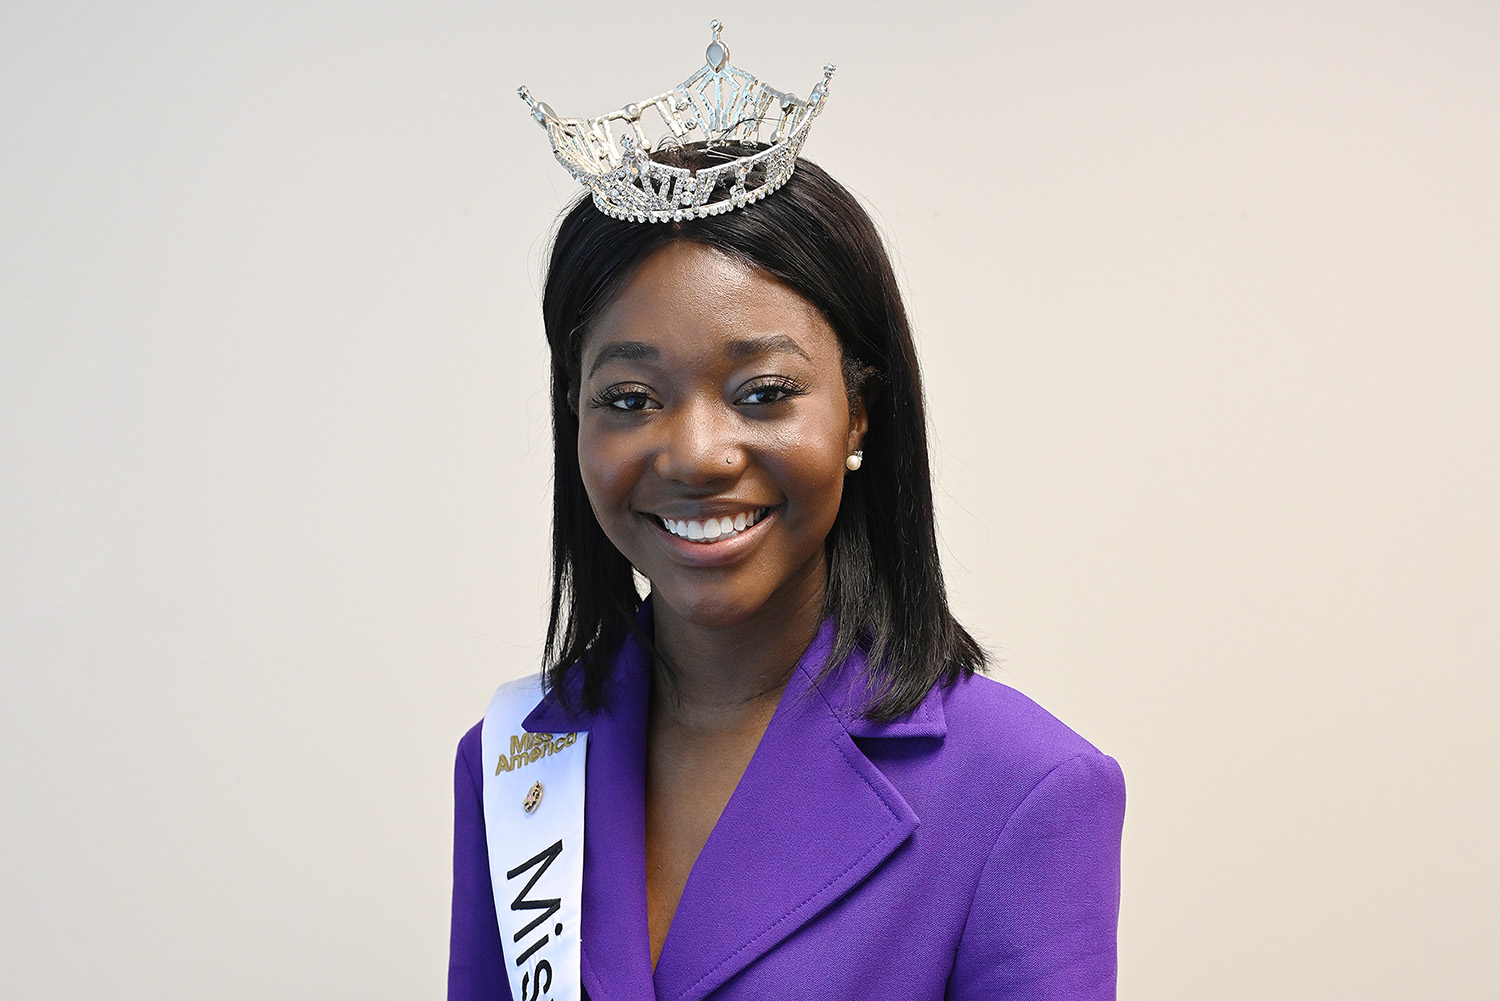 Here She Comes: Alum Uses Her Pageant Platform for Change